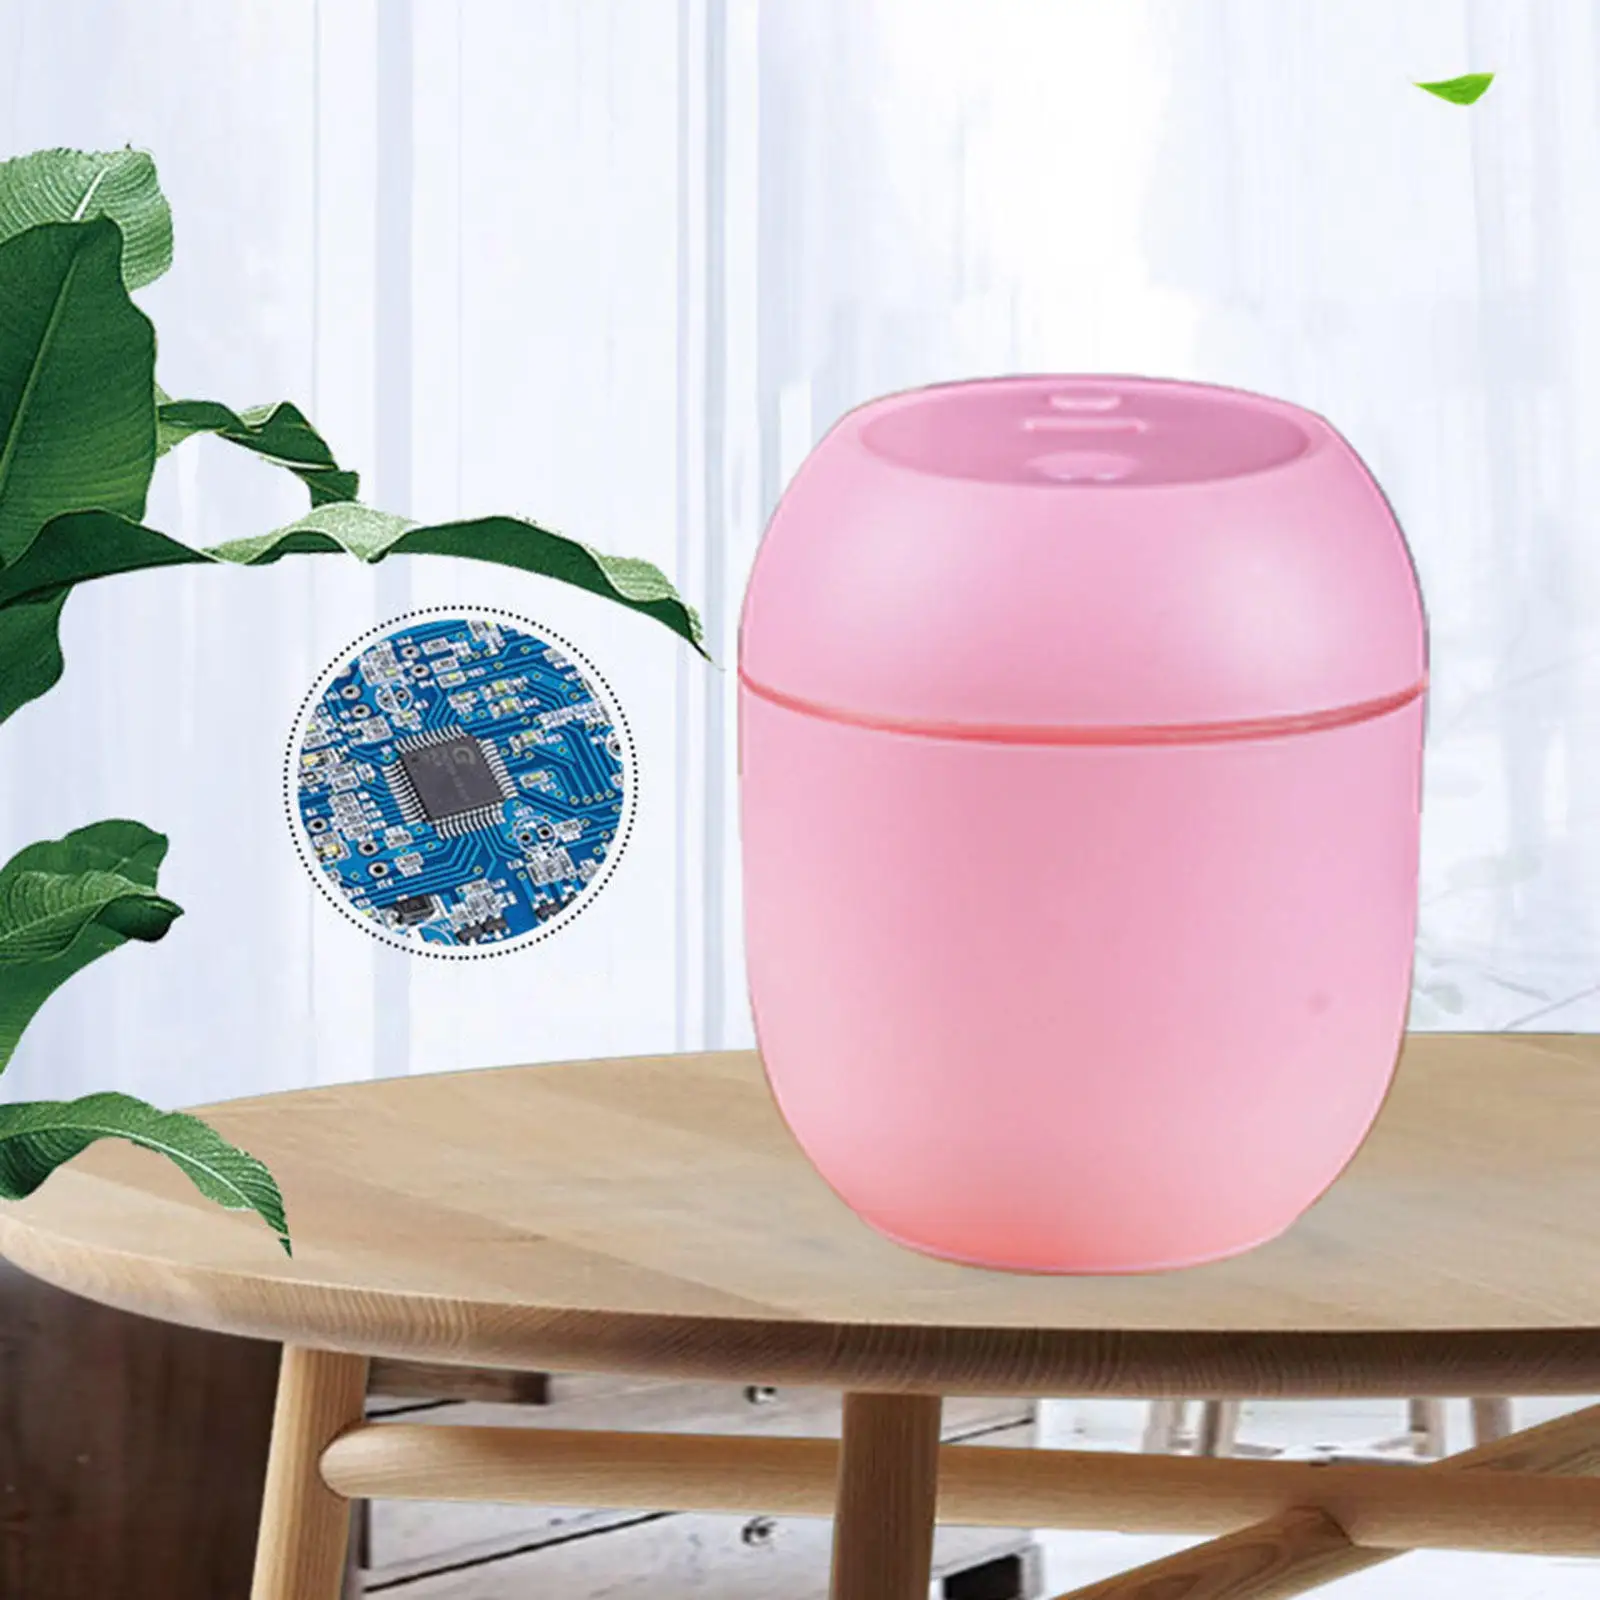 Portable USB Humidifier Cool Mist Humidifier with 7 LED Light Quiet Desktop Humidifier for Home Travel Office Auto Shut-Off